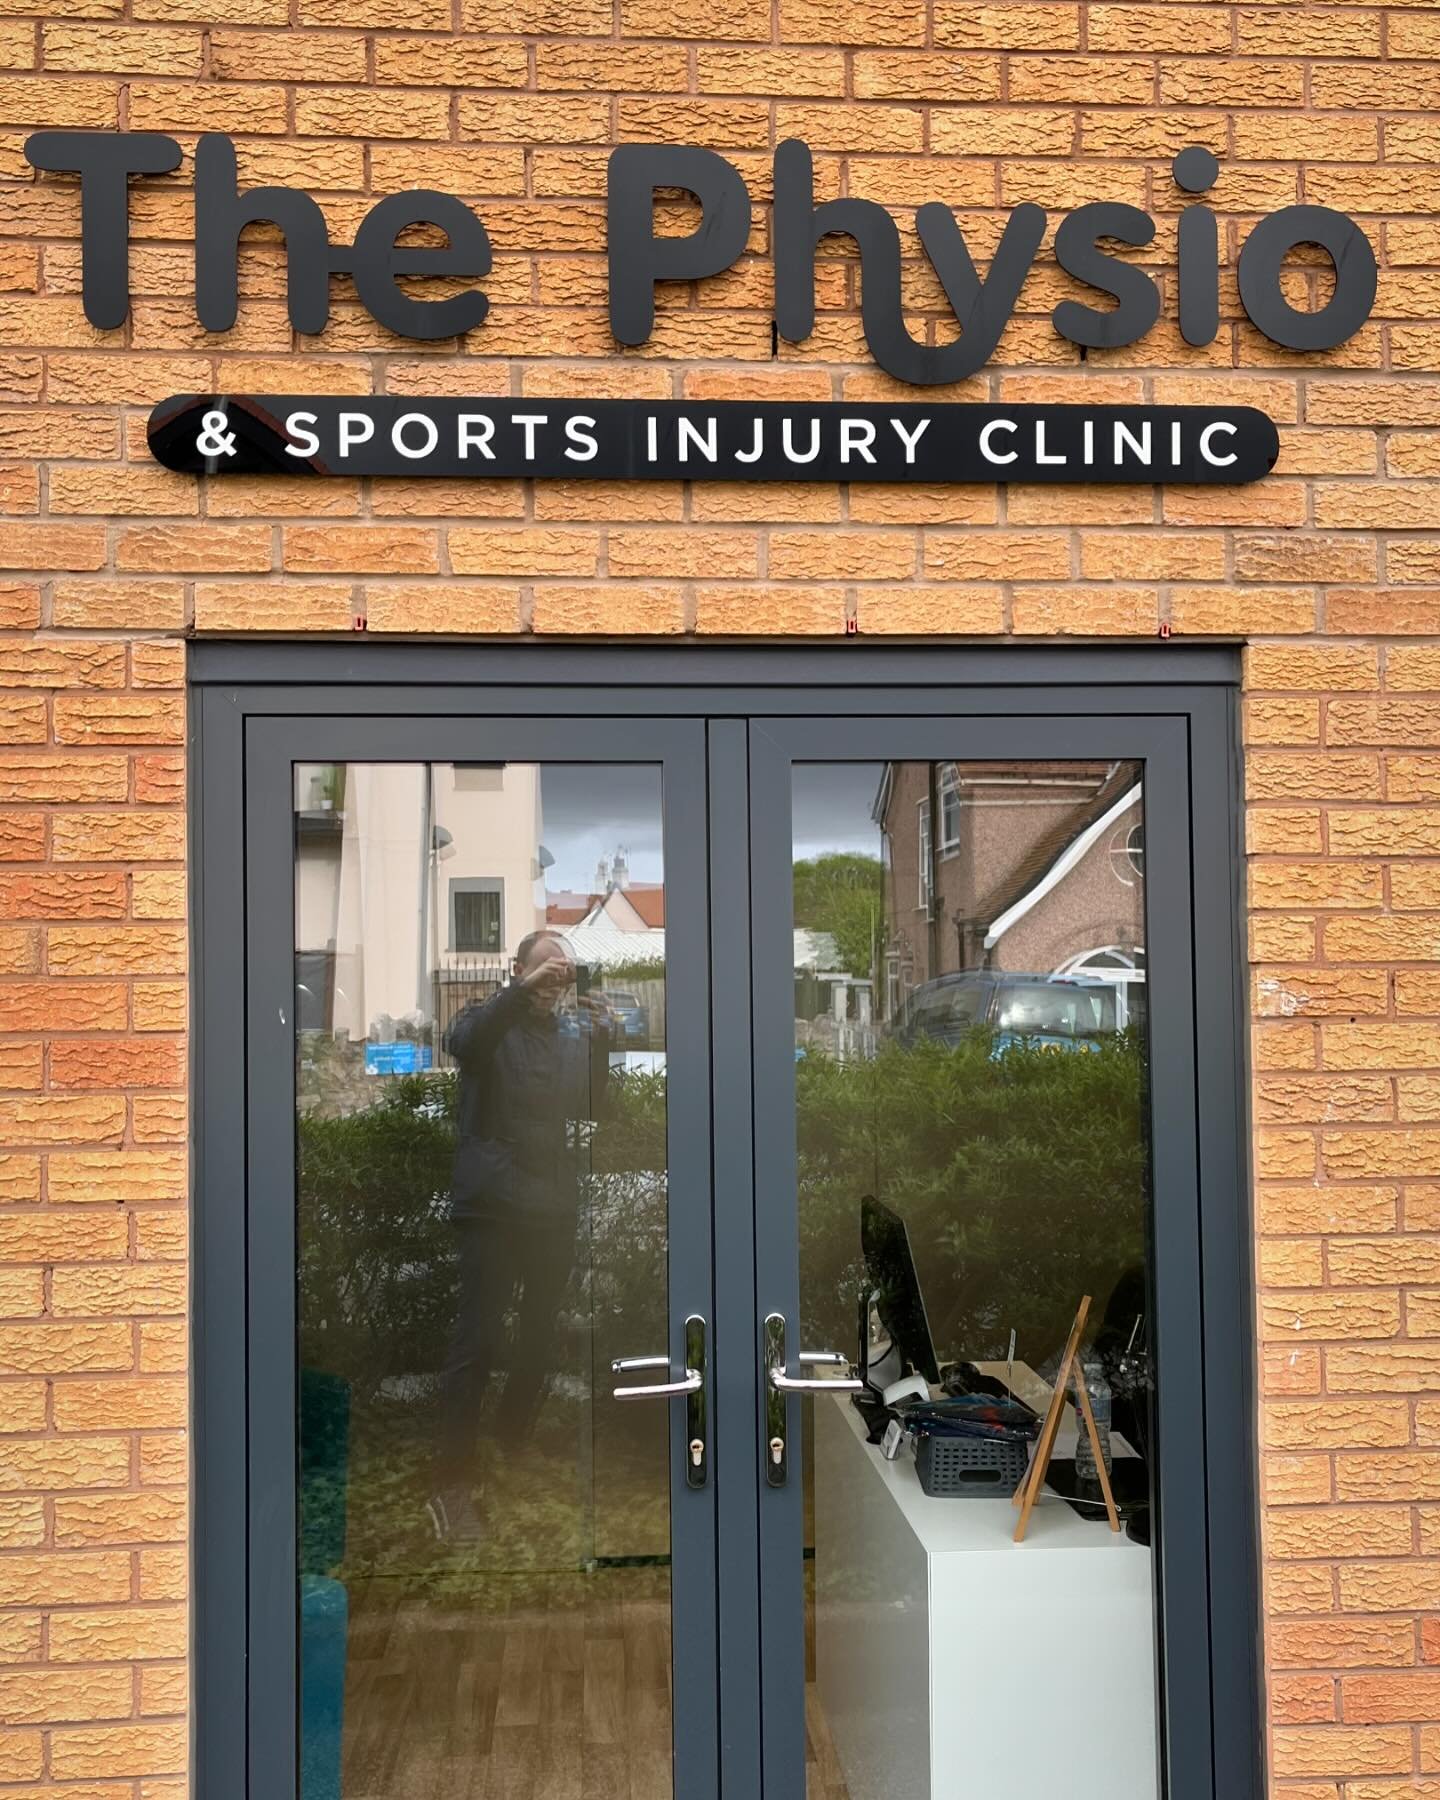 All set for another busy day in clinic. 
.
Remember we&rsquo;re open Saturdays if you need our help. 
@physioandsportsinjuryclinic [Link in Bio to book in]
.
.
.
#physio #physionorthwales #physioandsportsinjuryclinic #rhosphysio #rhosphysiotherapy #r